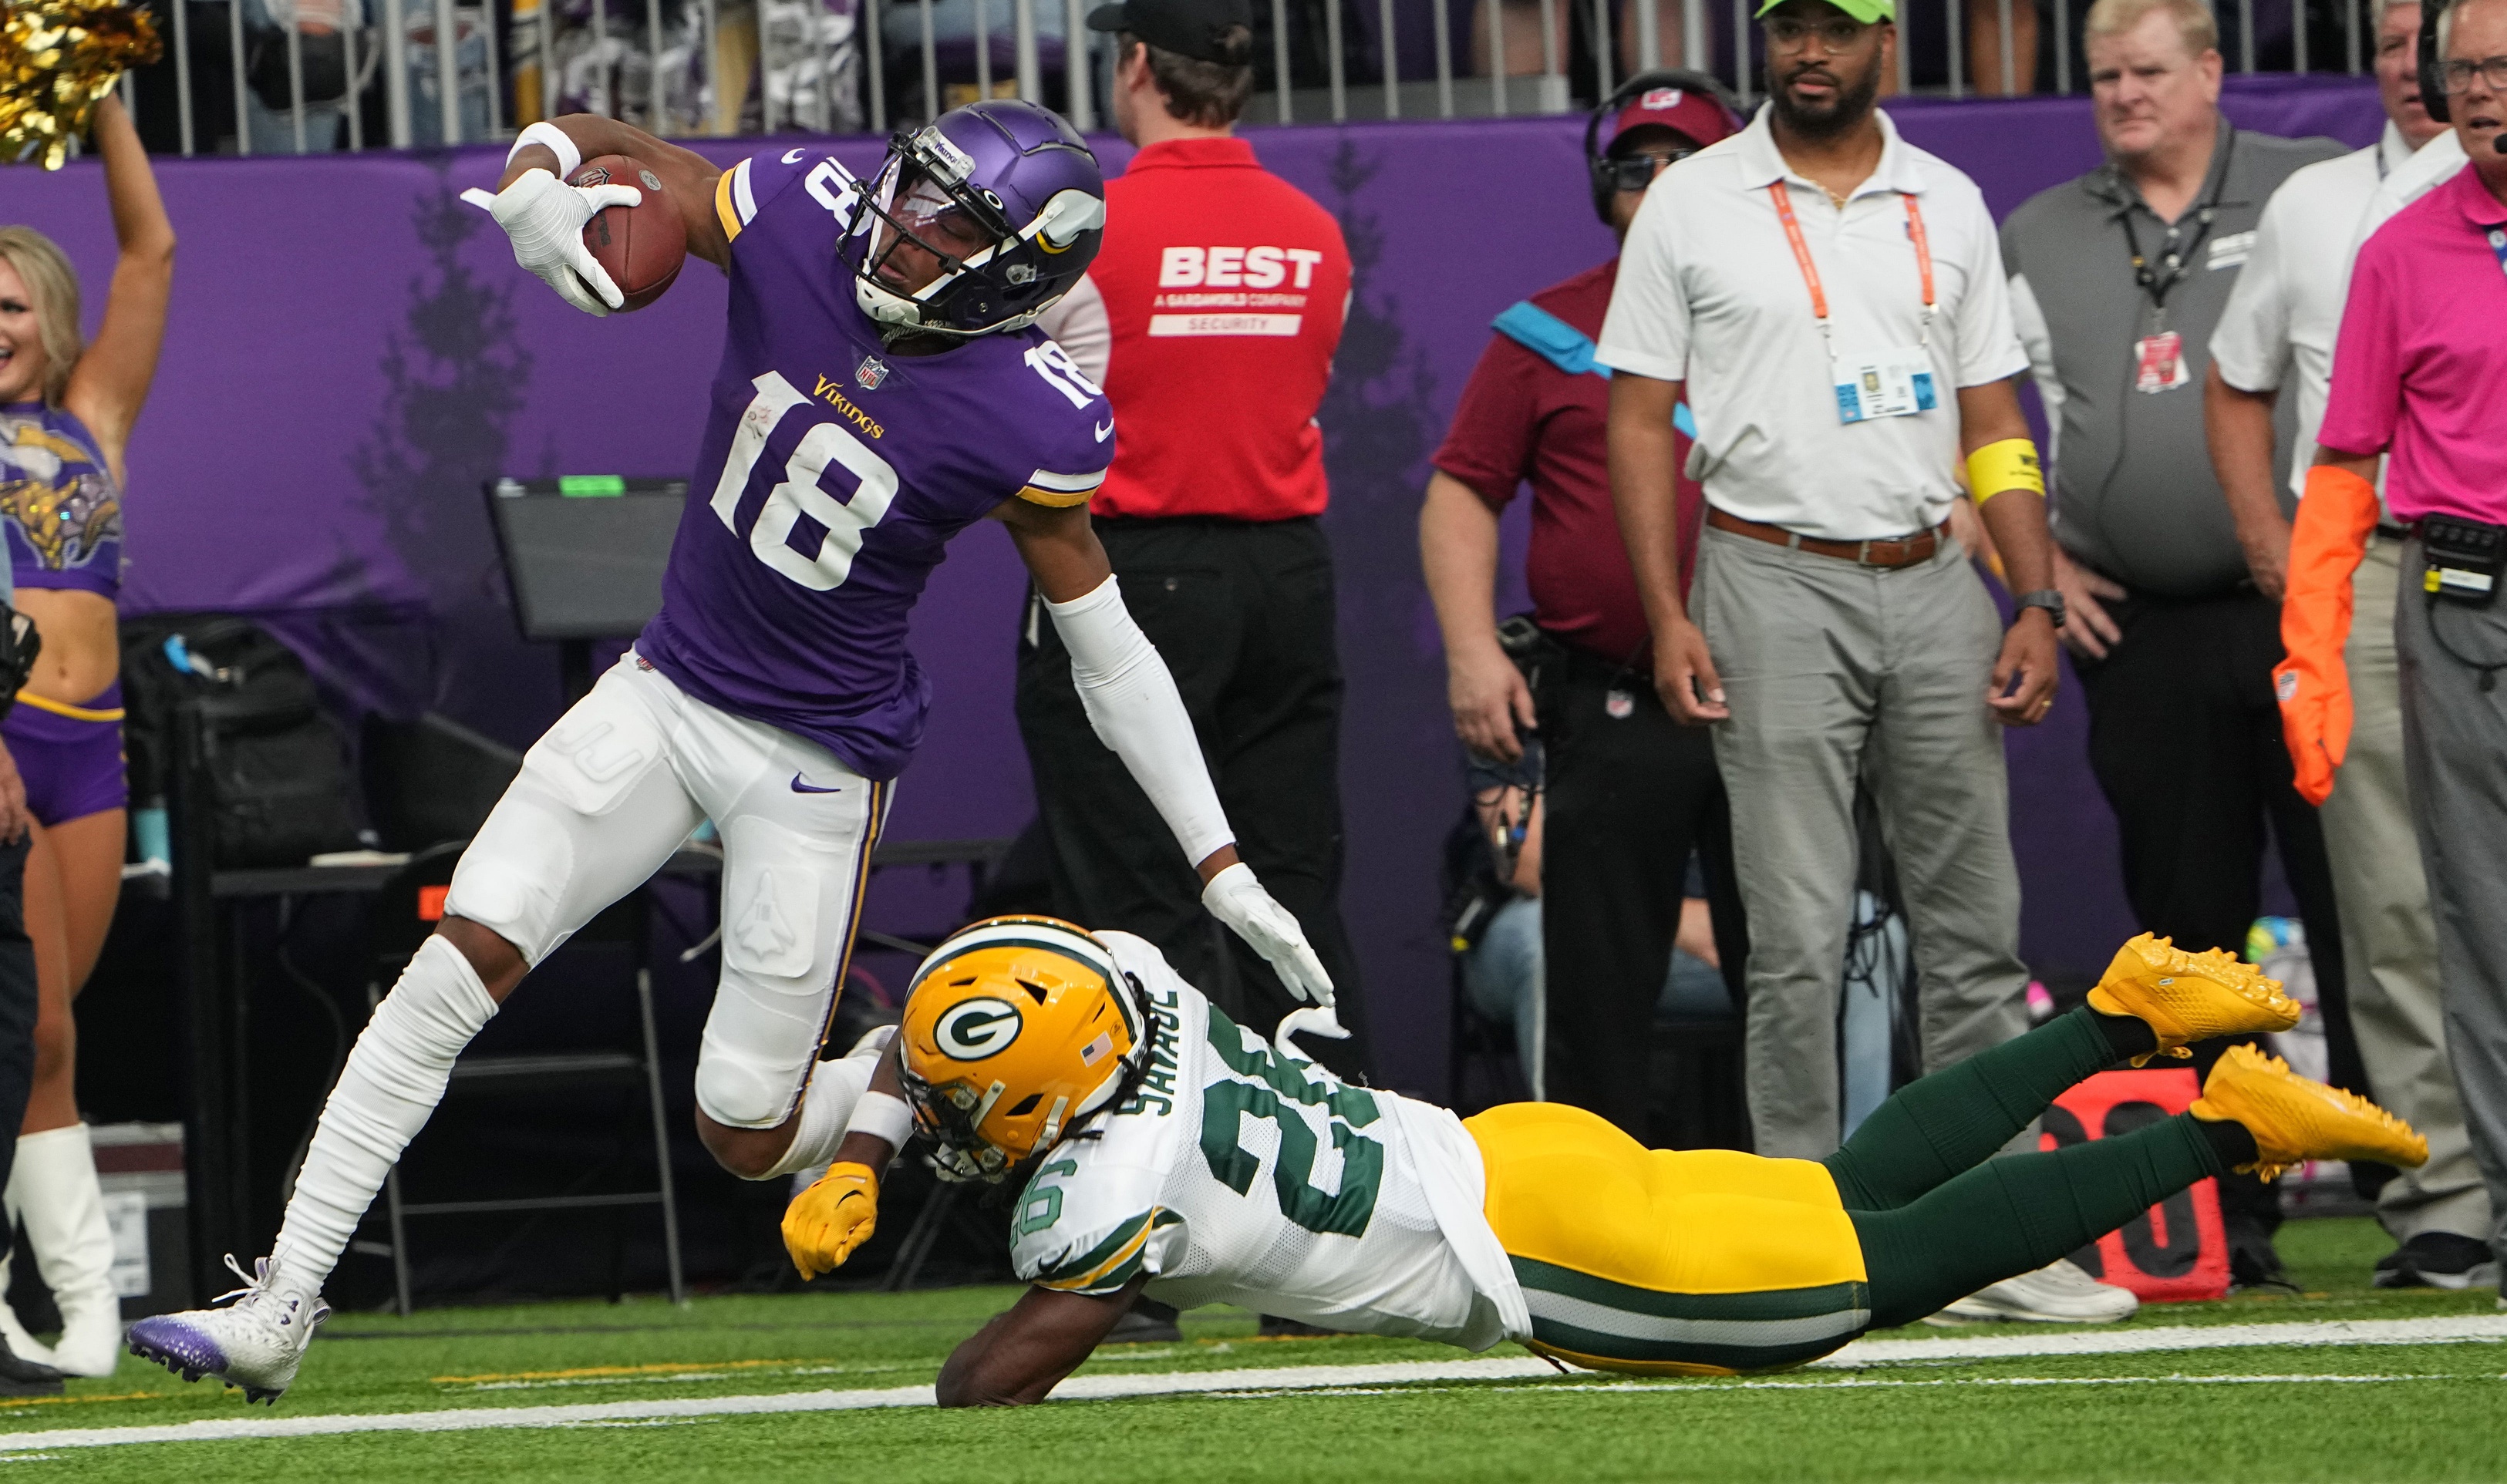 Minnesota Vikings Schedule Release Eve Speculation - The Ron